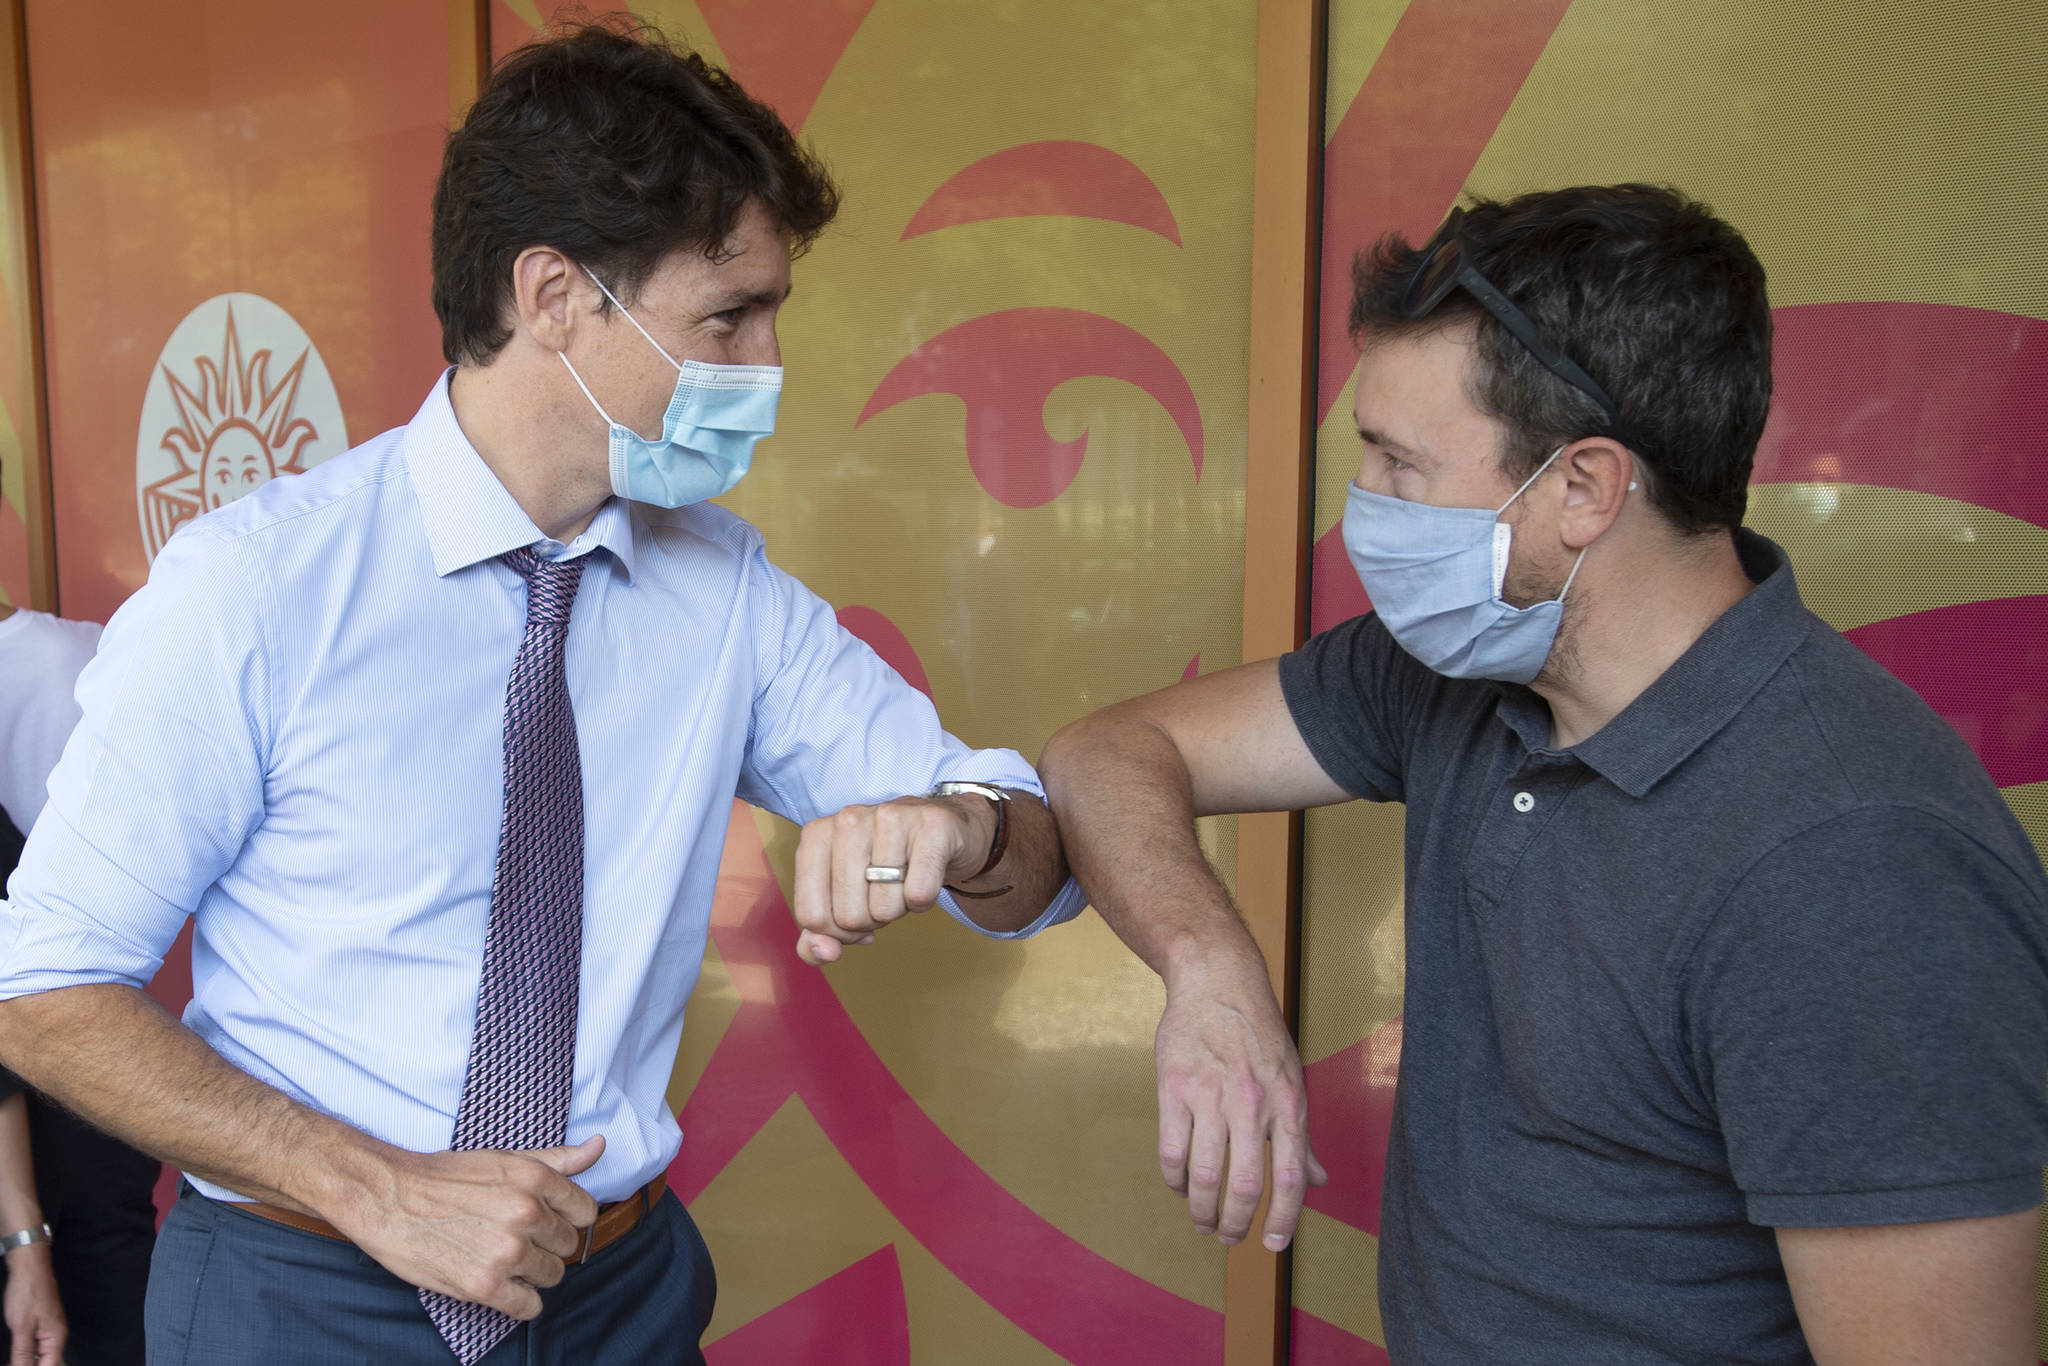 Prime Minister Justin Trudeau greets people waiting for their shots while visiting a COVID-19 vaccination clinic Thursday, July 15, 2021 in Montreal.THE CANADIAN PRESS/Ryan Remiorz